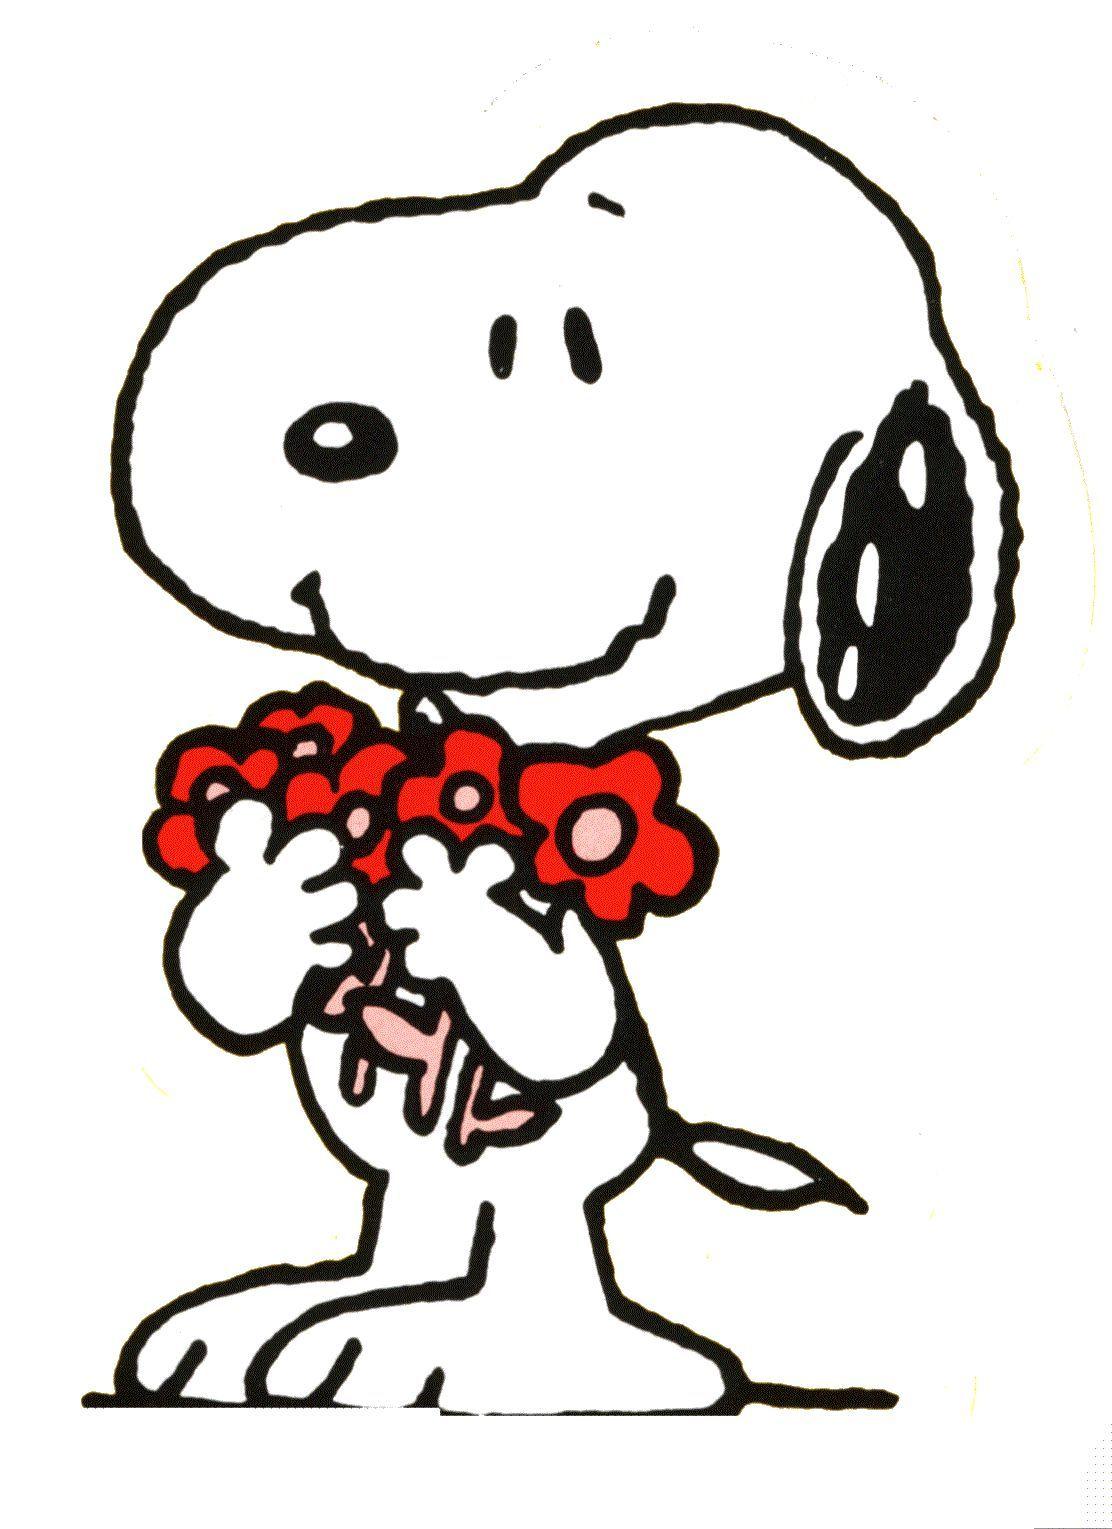 Flowers. ❤ Snoopy. Snoopy, Flowers and Charlie brown